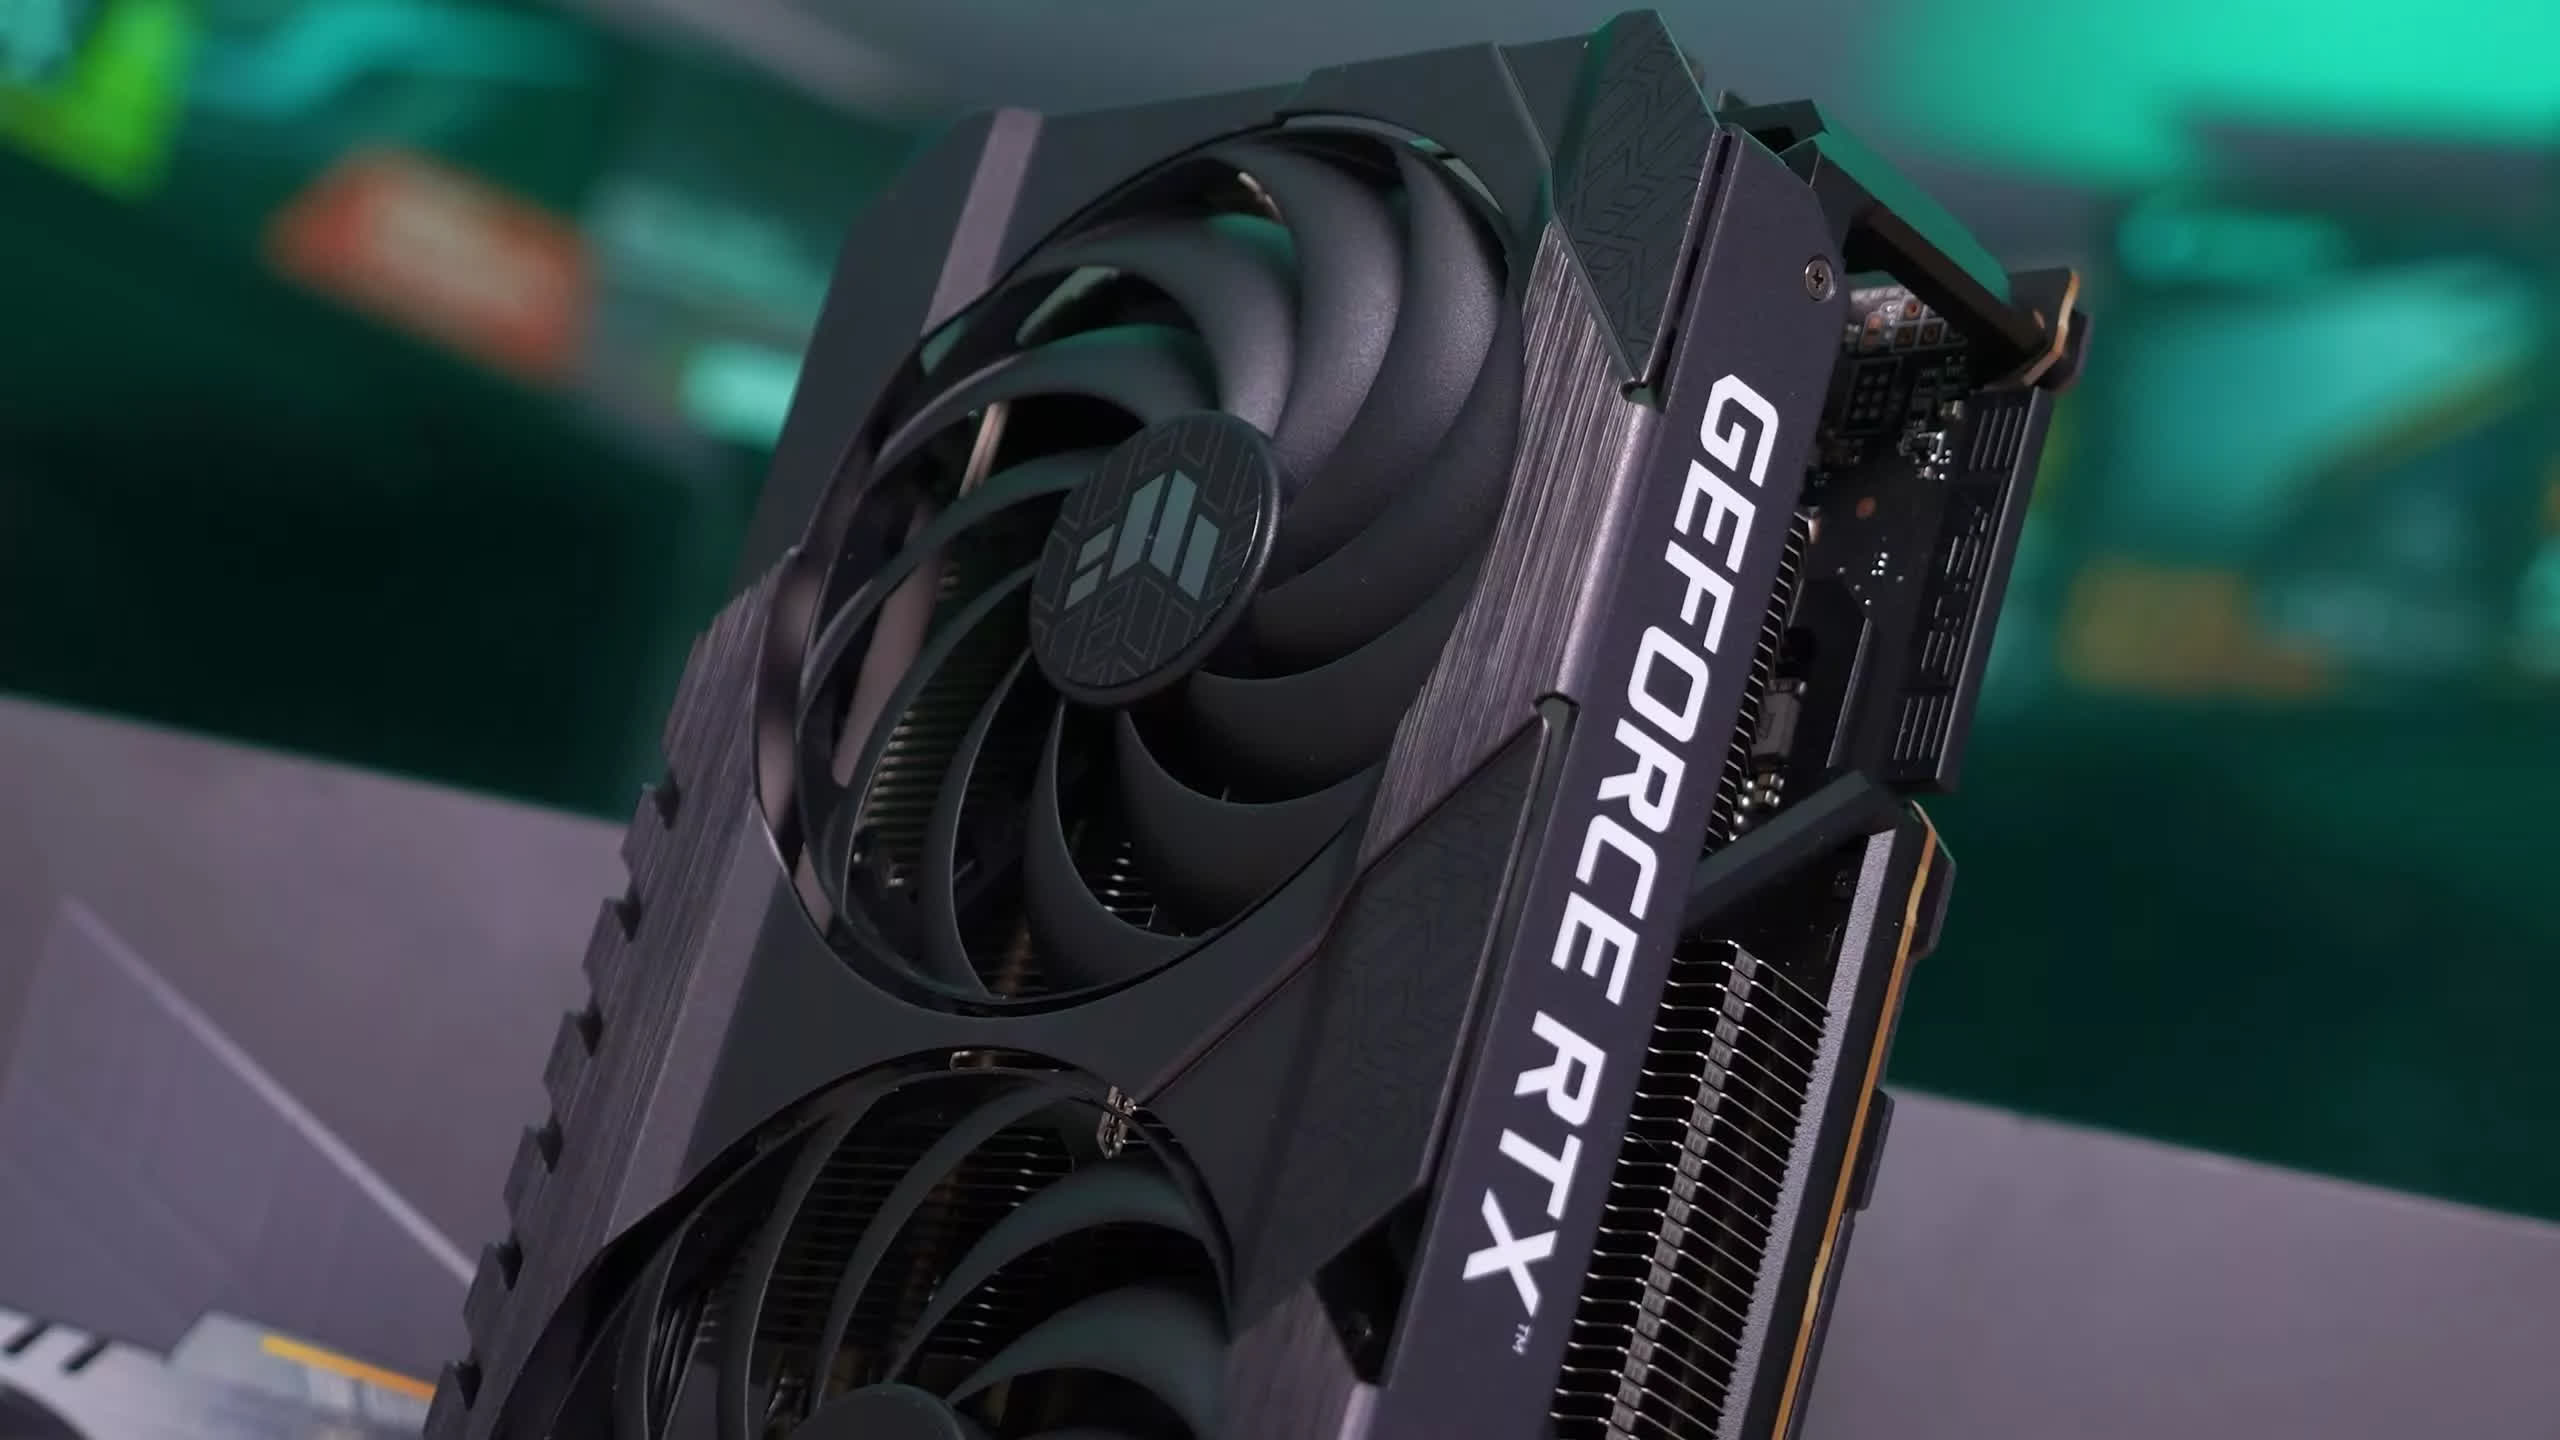 Nvidia rumored to launch RTX 4090 first, RTX 4080 and RTX 4070 to follow